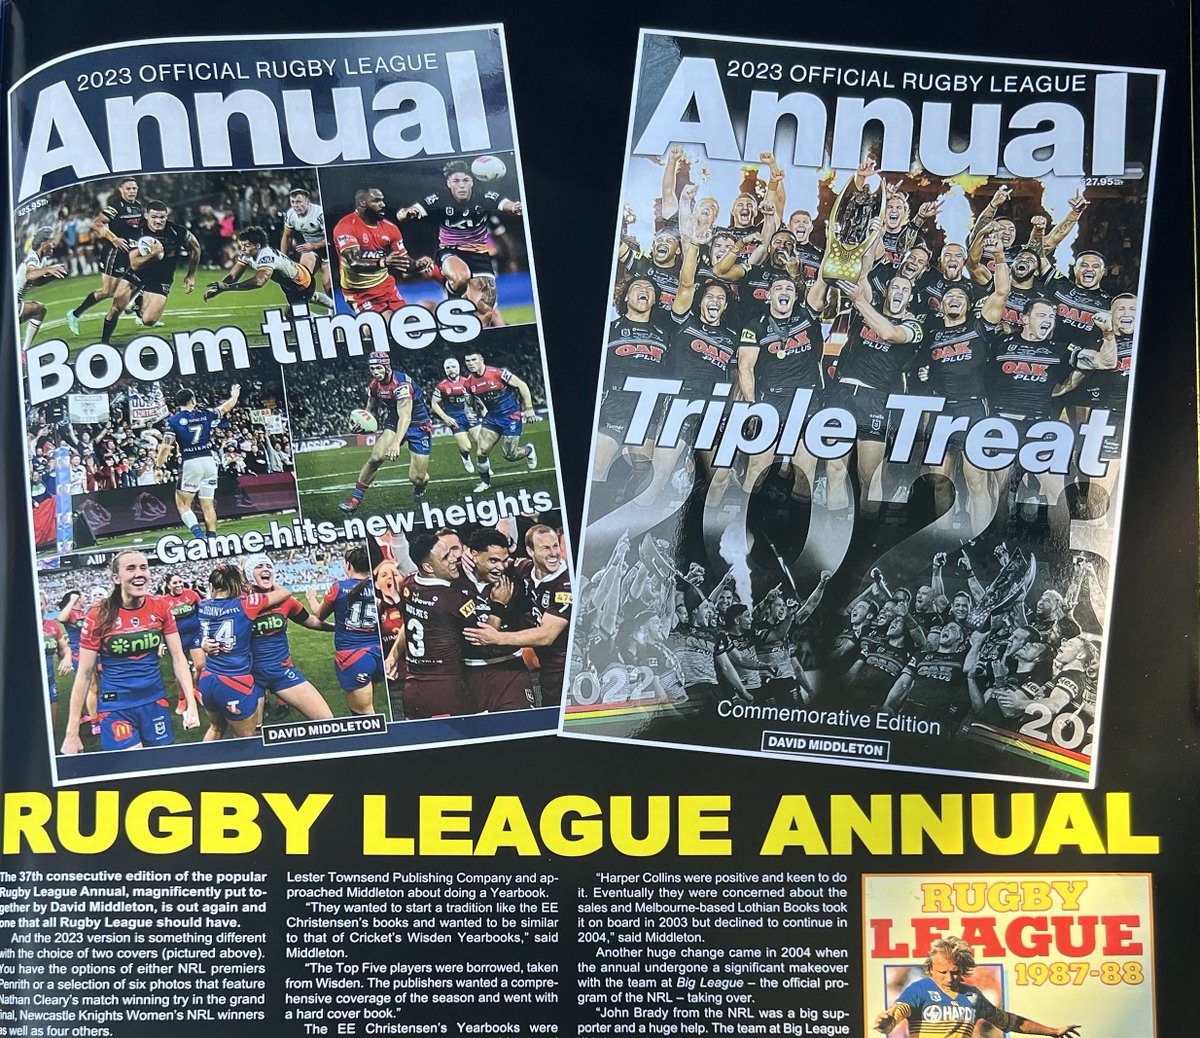 Thanks to Terry Liberopolous for featuring the official NRL Annual in his latest edition of Rugby League Review. rugbyleaguereview.com/subscribe.htm rugbyleagueannual.com.au